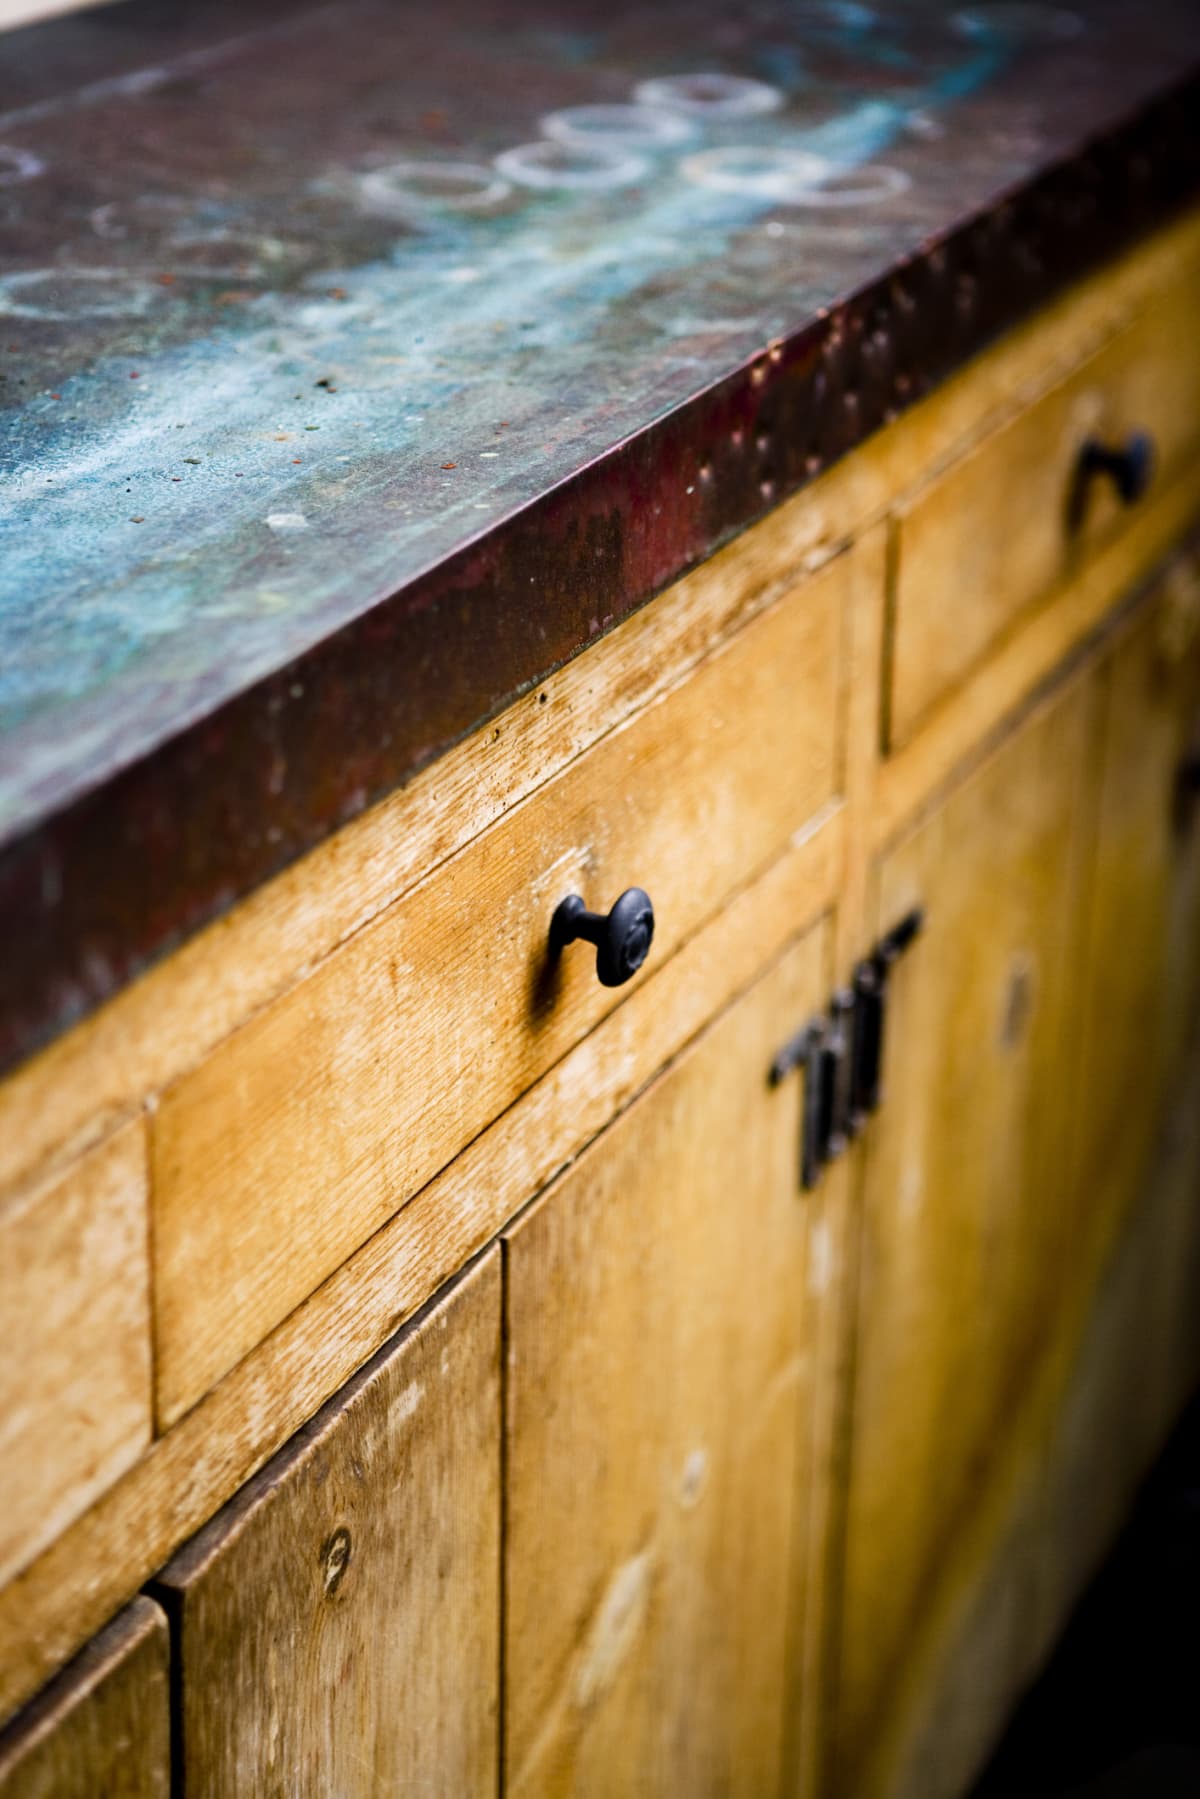 Old wooden cabinets with stains